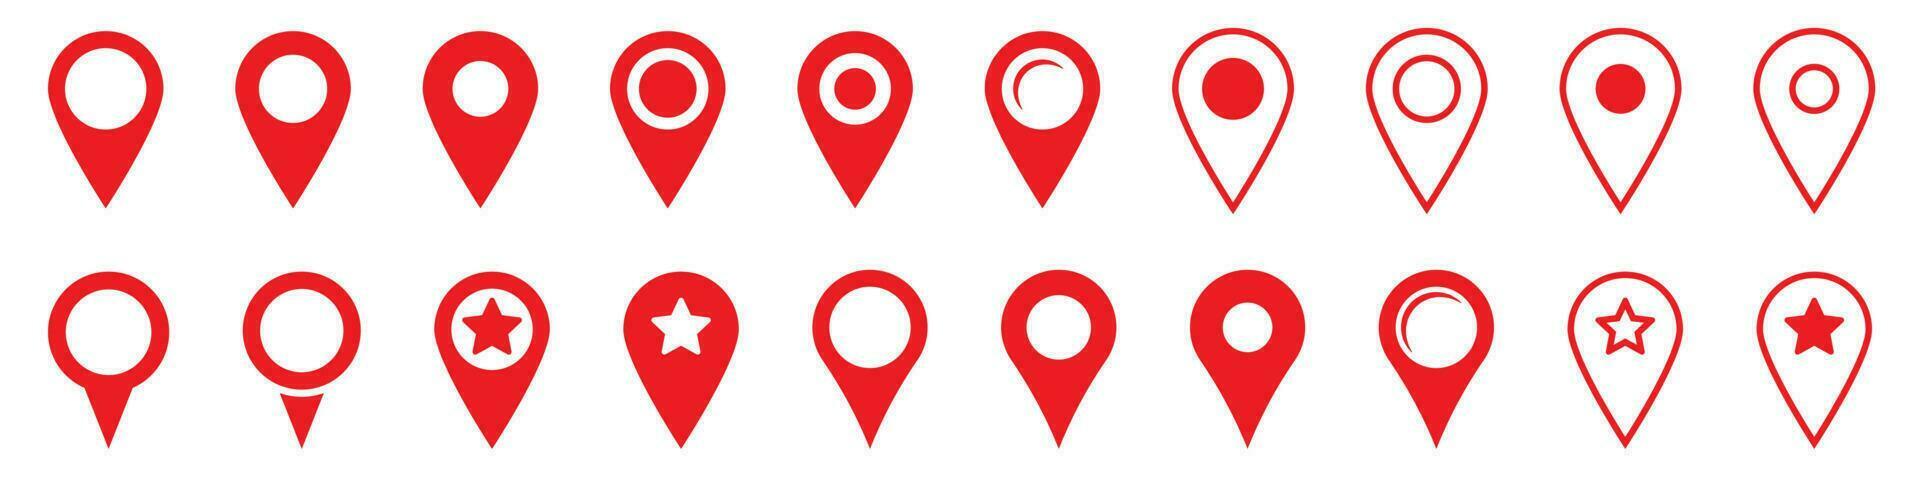 Red maps pin. Location map icon. Location pin. Pin icon vector. vector